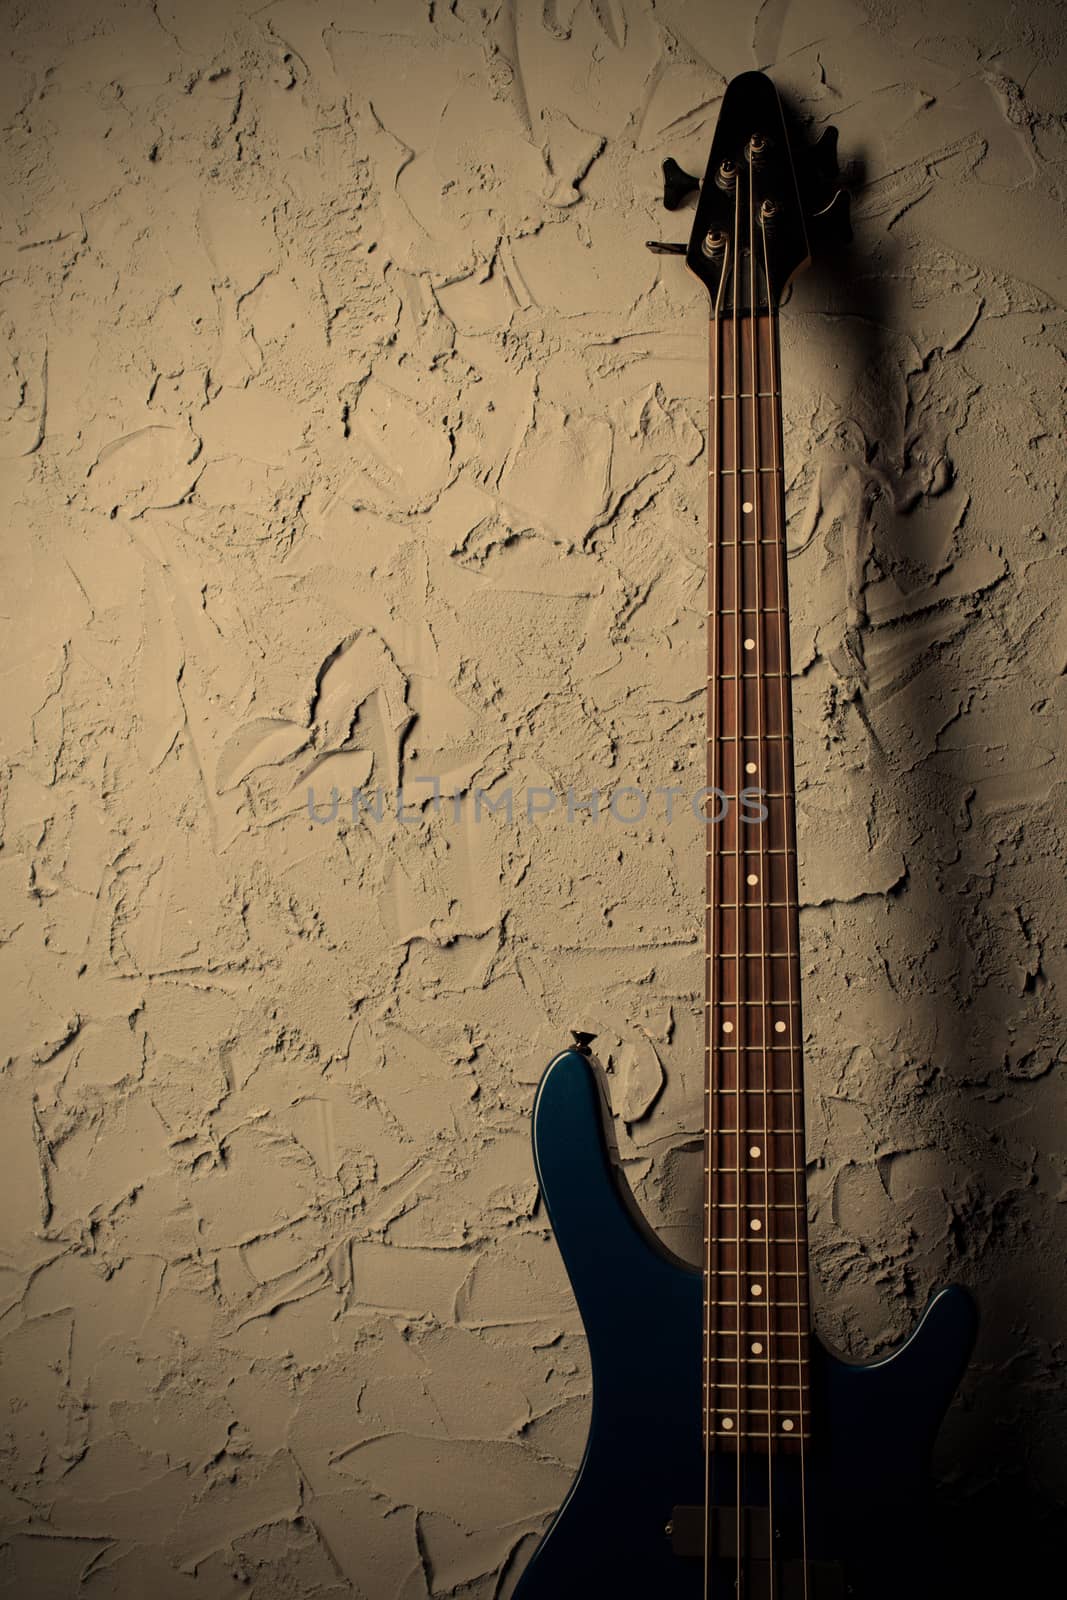 guitar stands near the gray wall, instagram image style